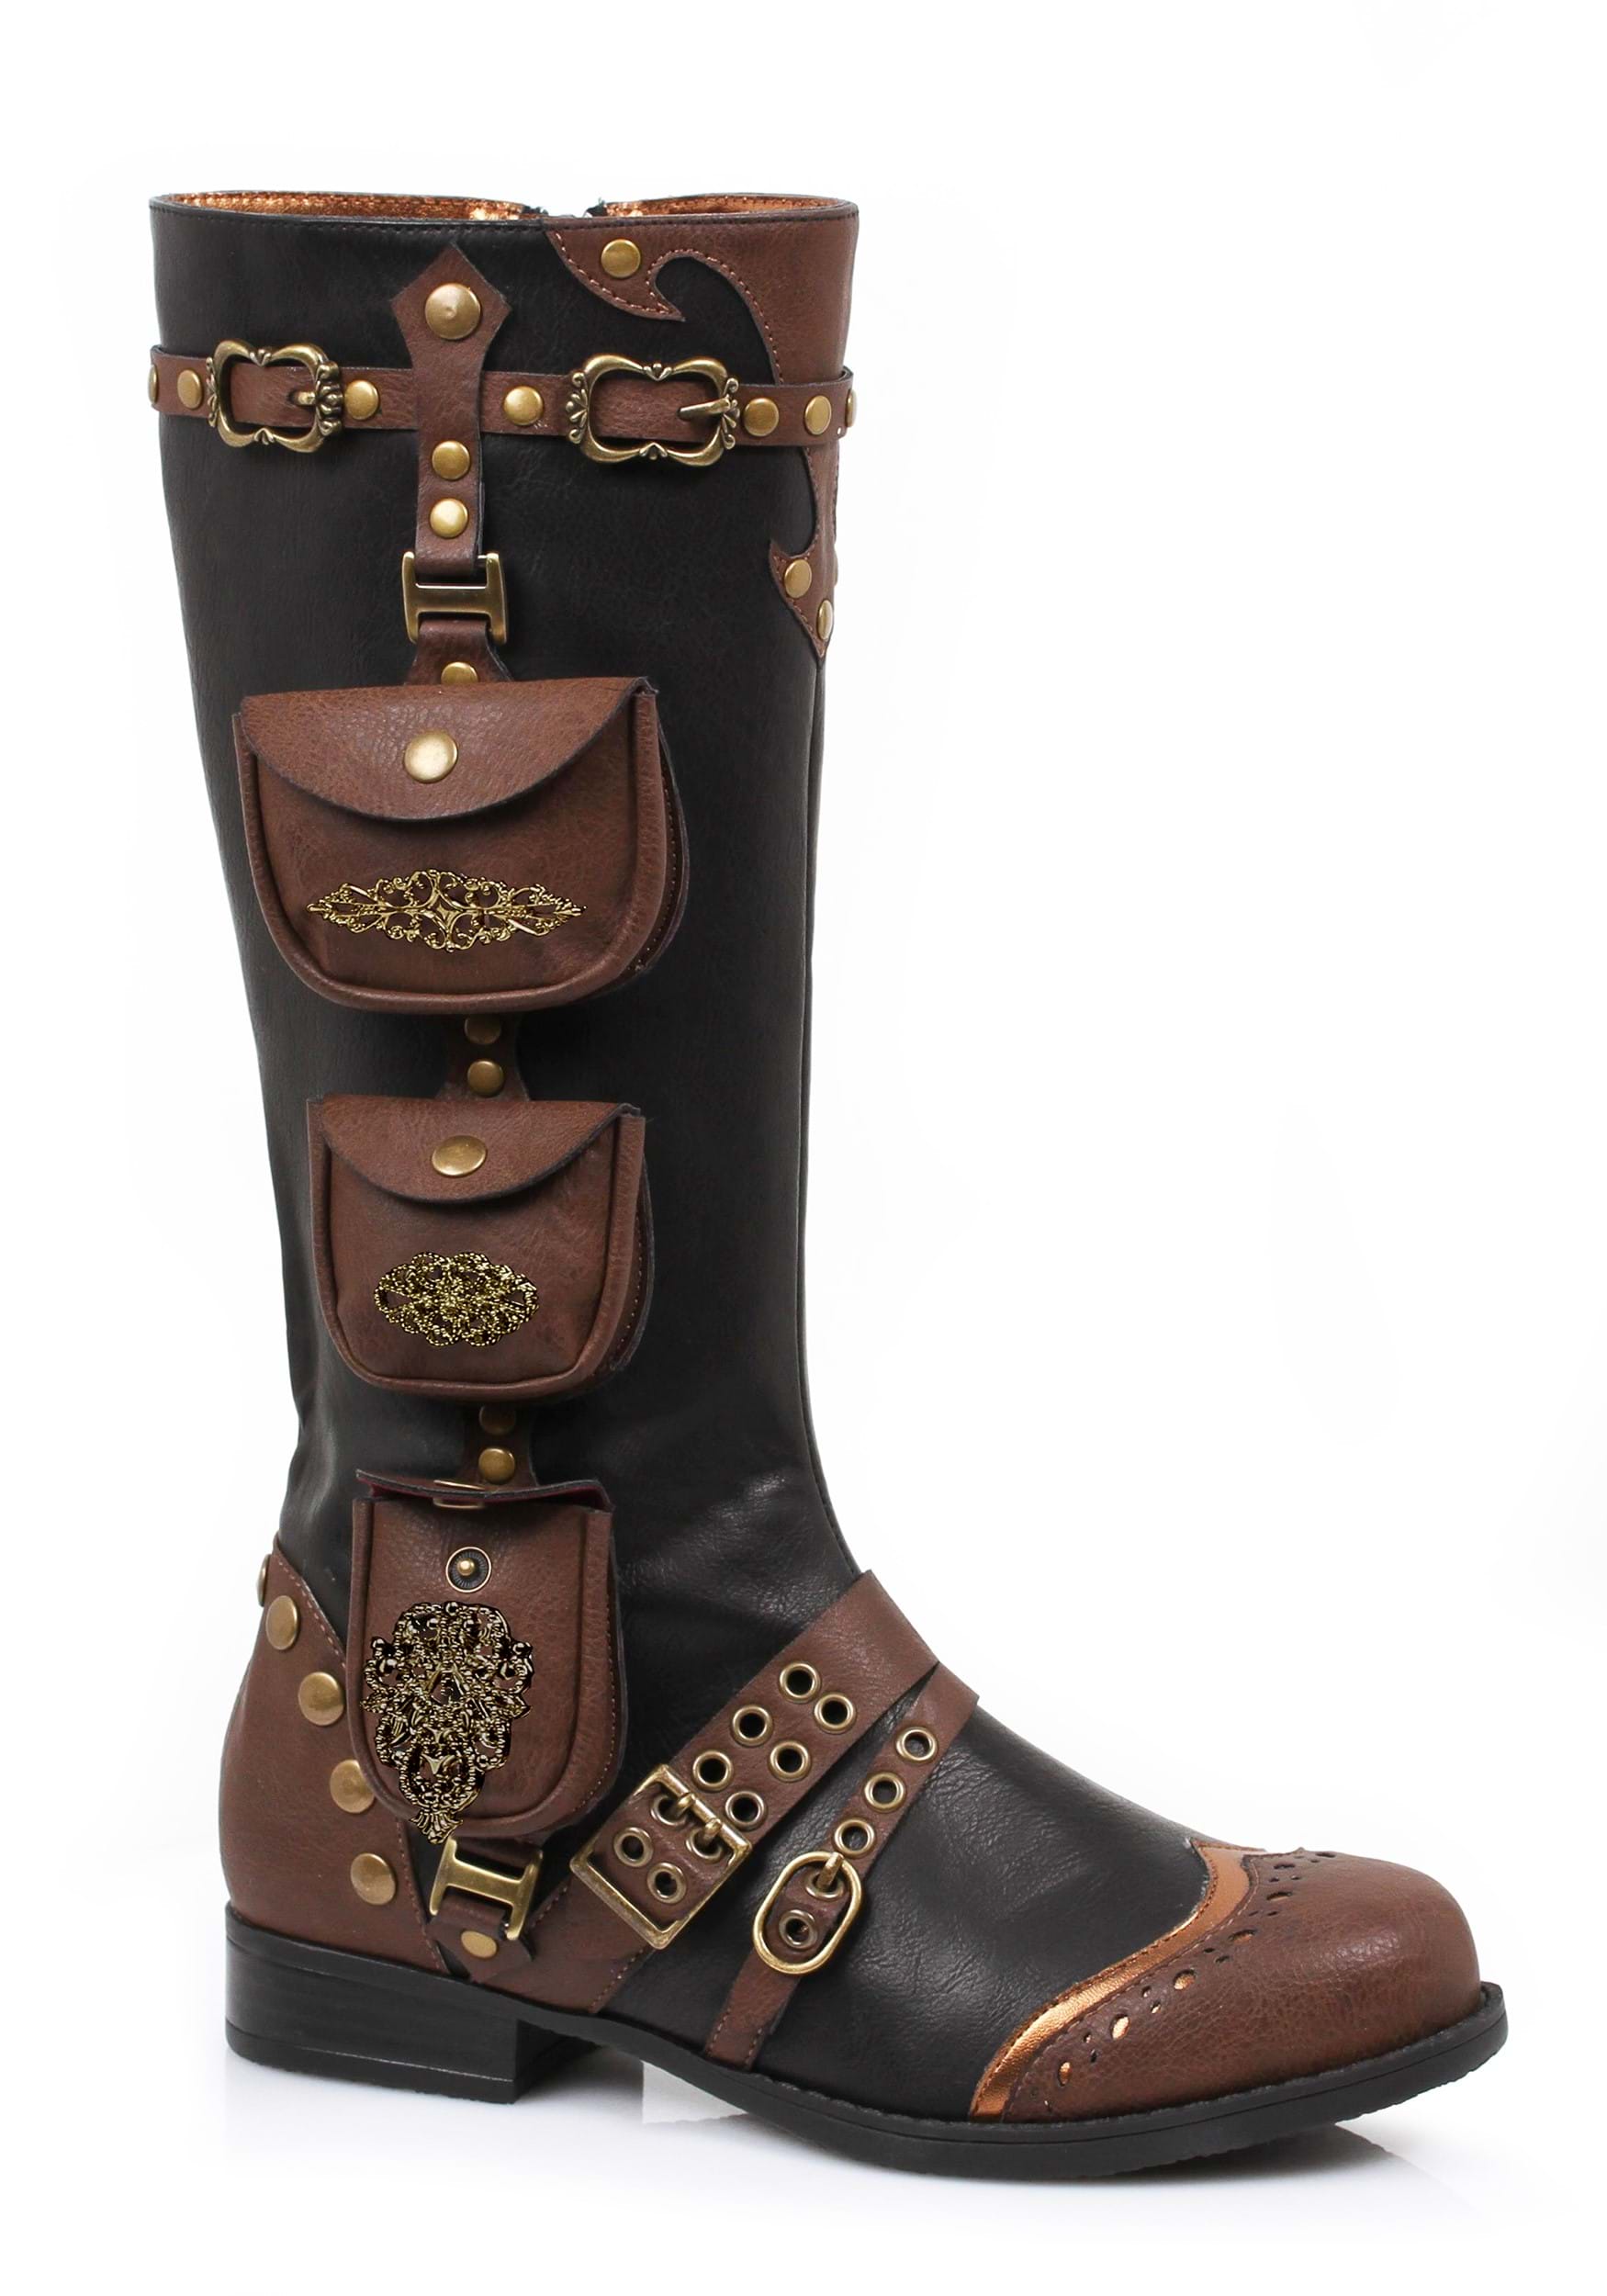 https://images.halloweencostumes.ca/products/72377/1-1/womens-steampunk-boots.jpg